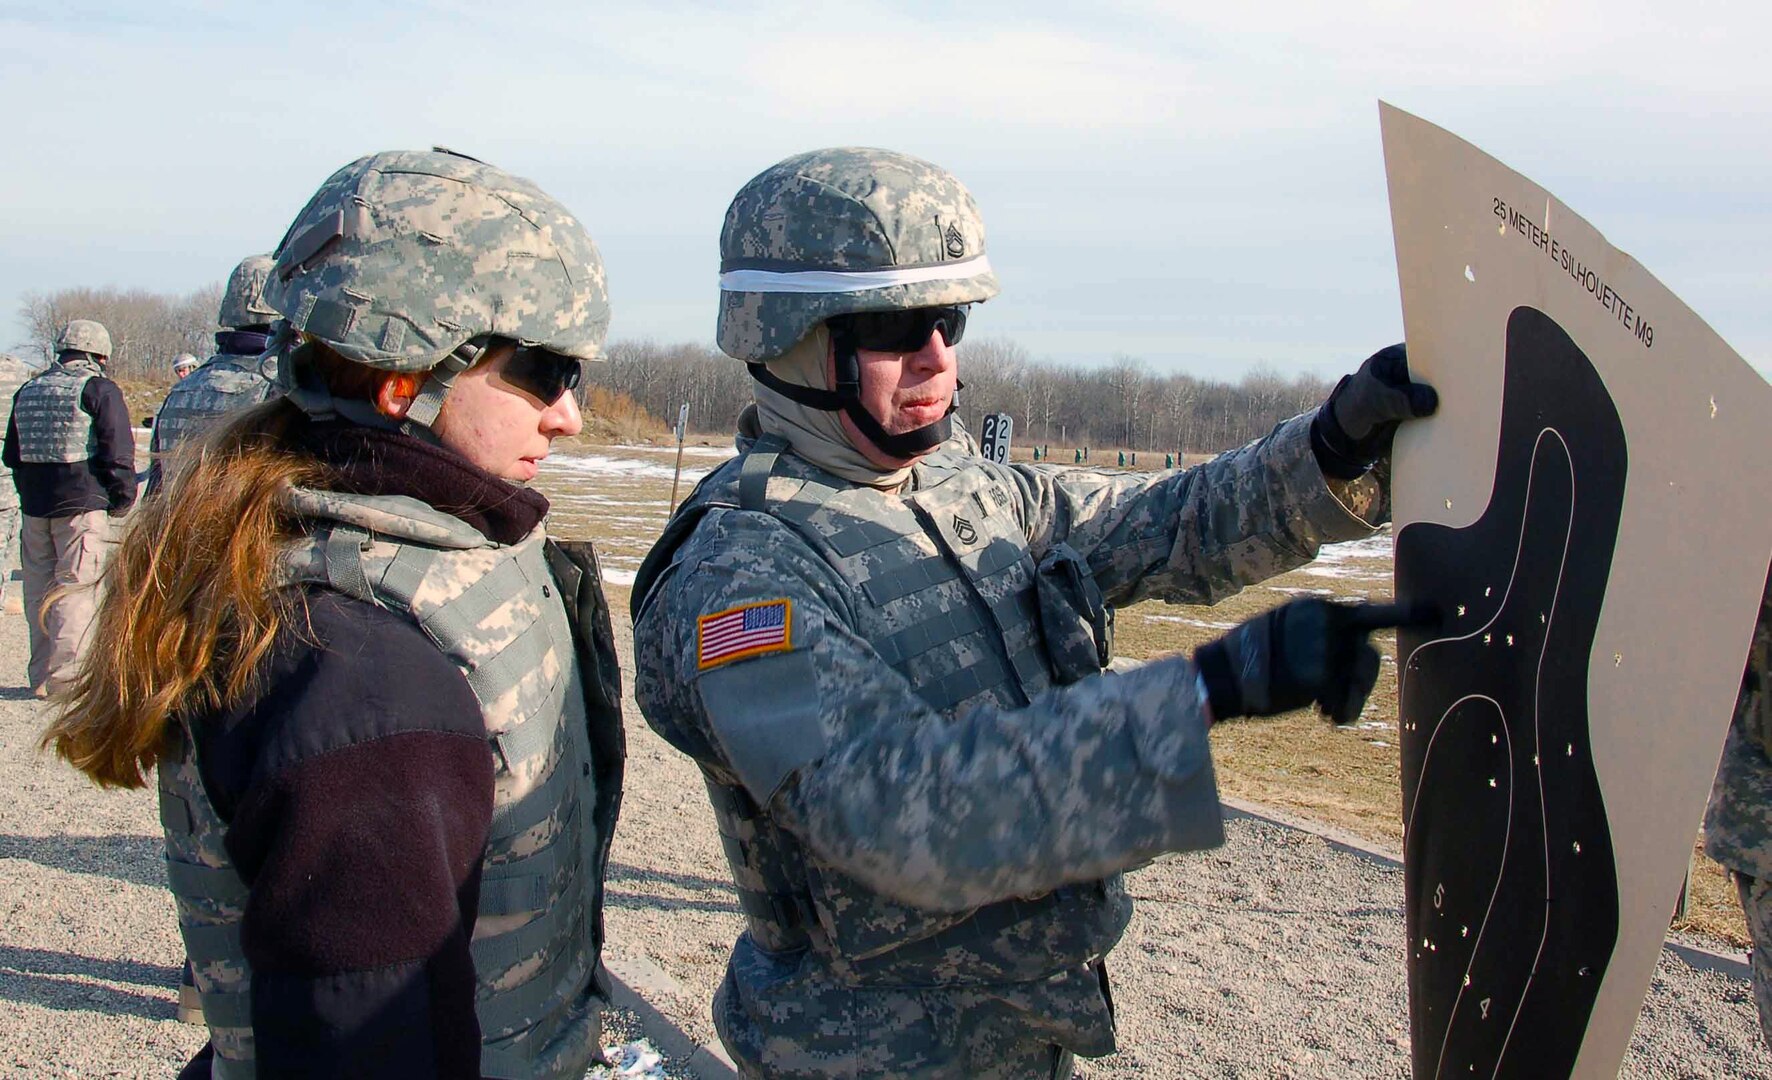 A range safety from the Indiana National Guard shows
Julia Schoenfeld her results after she fired an M-9 pistol. Schoenfeld is
with the Civilian Expeditionary Workforce, a workforce of Department of
Defense civilians trained and equipped to deploy oversees in support of
worldwide military missions. The very first iteration of the CEW graduated
from the Camp Atterbury, Ind., training site Feb. 3, 2010.